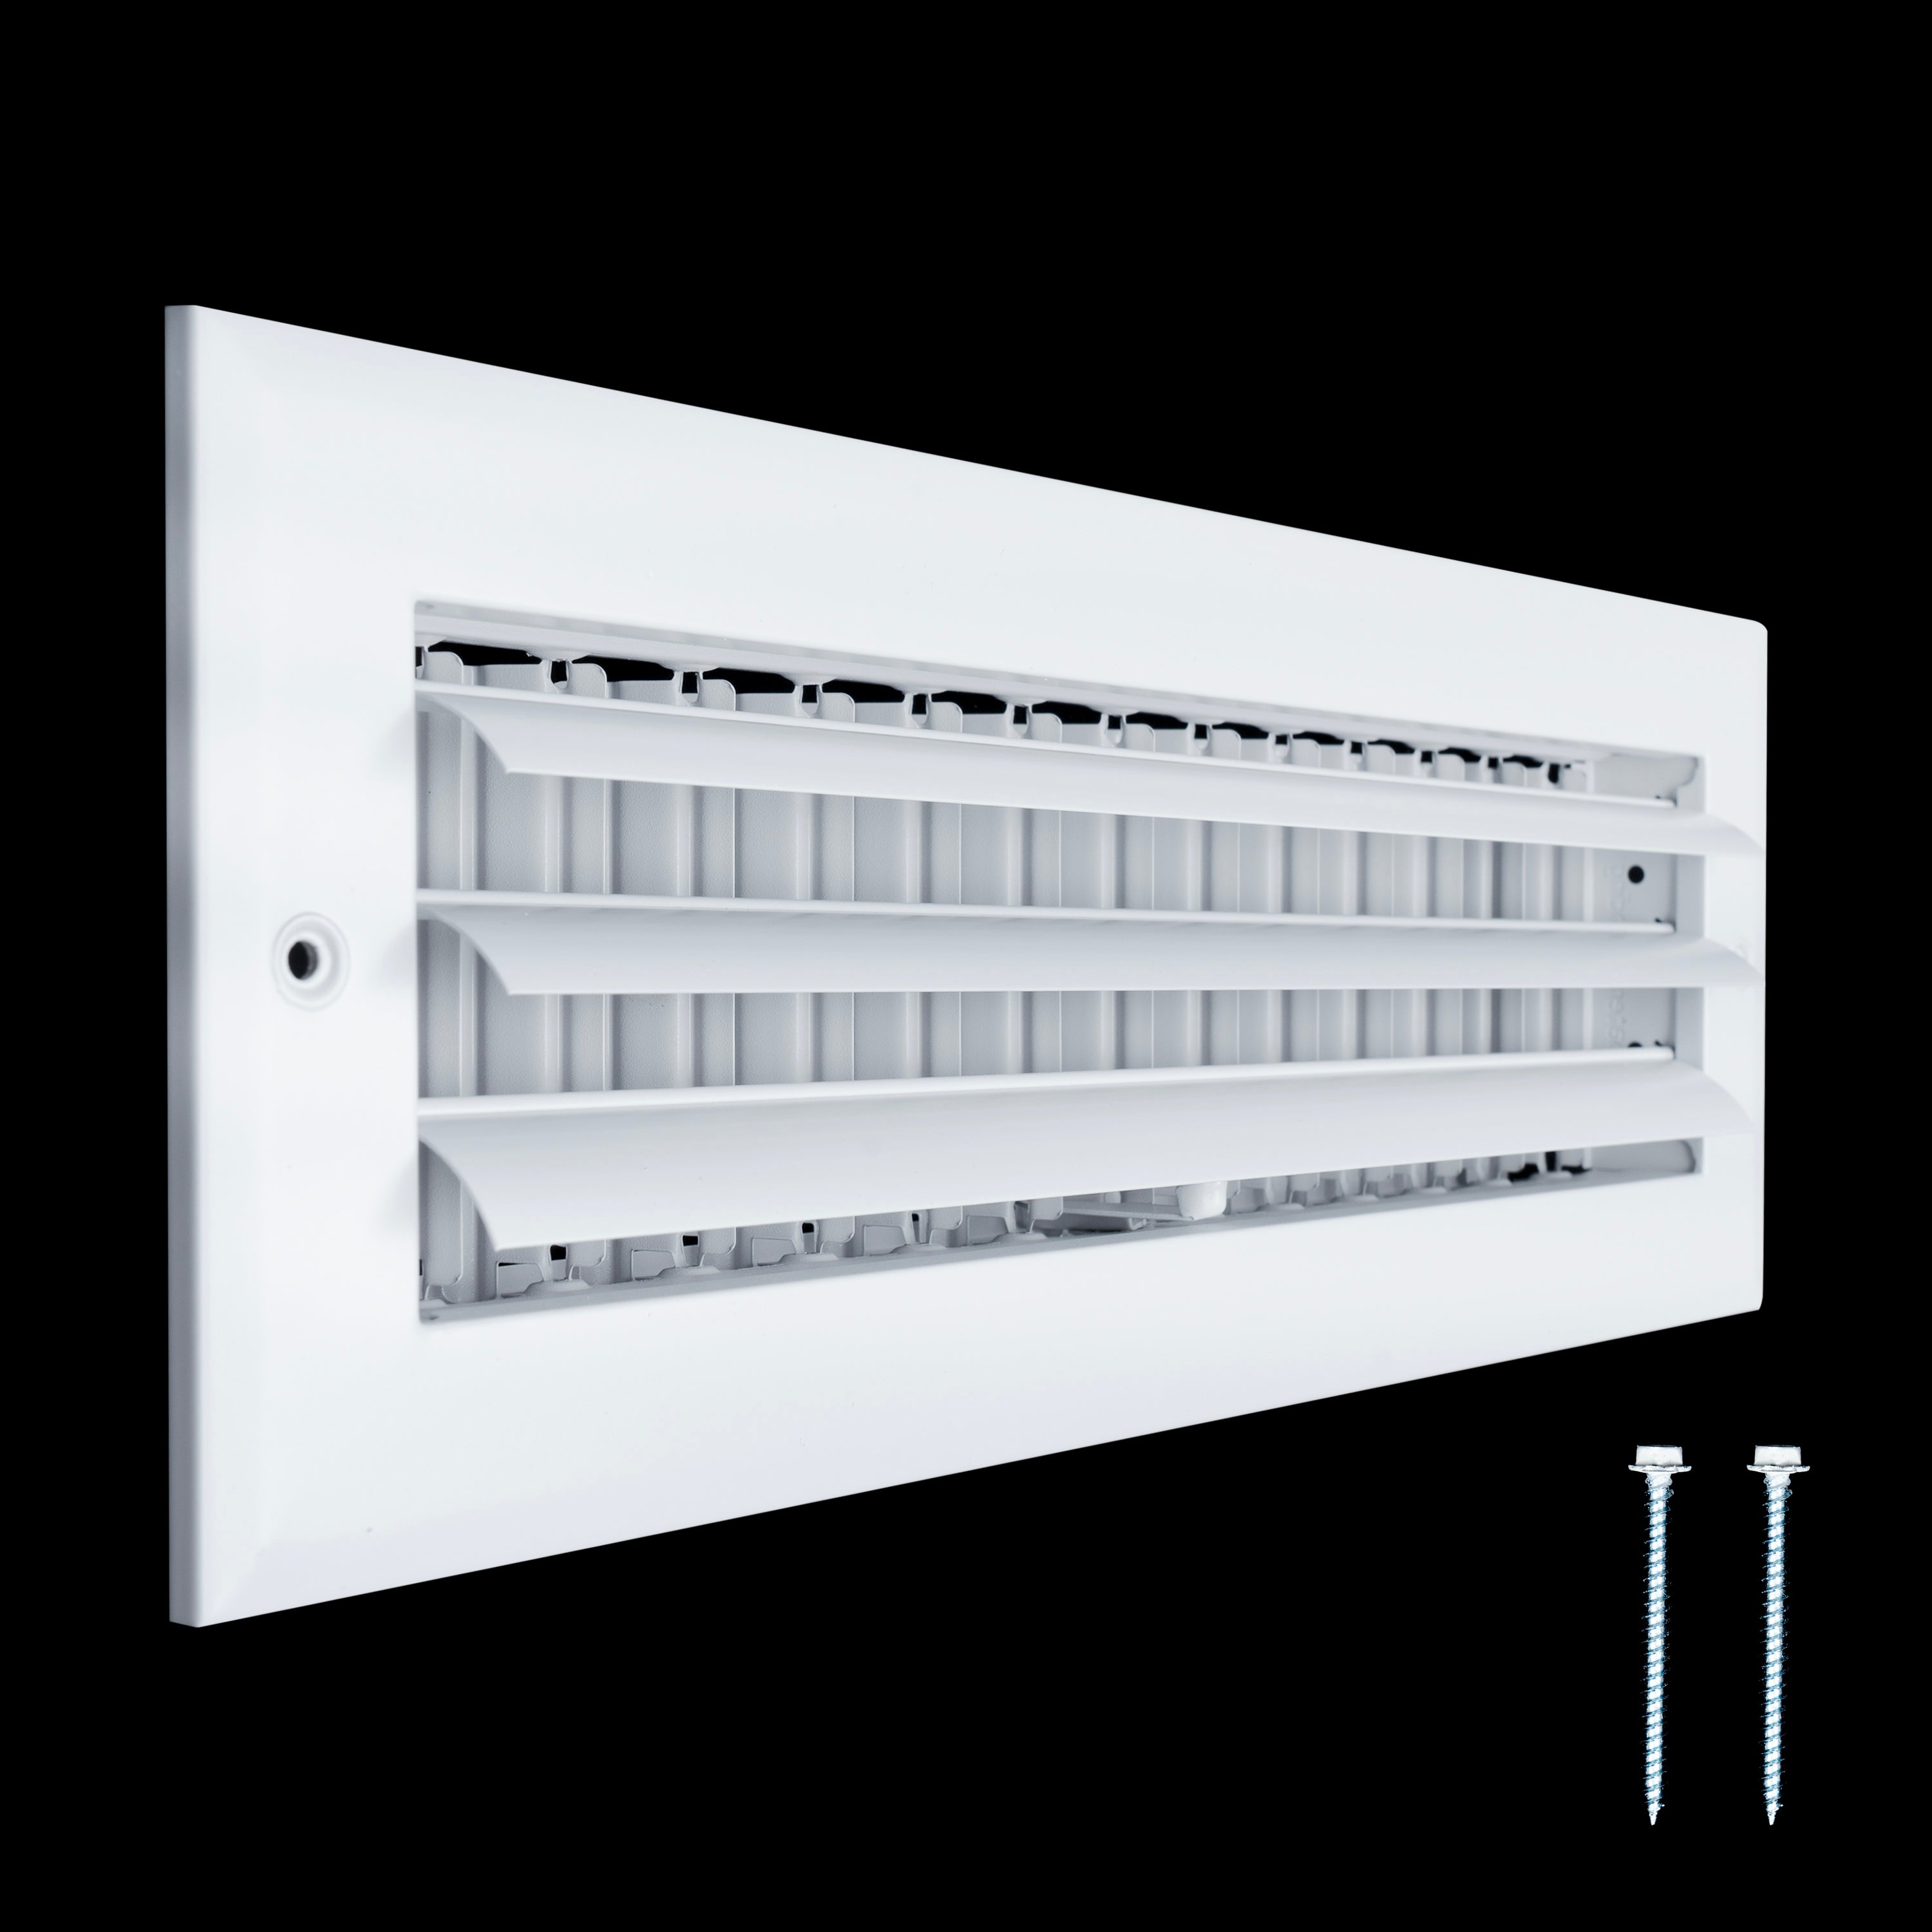 14"W x 4"H [Duct Opening] Aluminum 1-WAY Adjustable Air Supply Grille | Register Vent Cover Grill for Sidewall and Ceiling | White | Outer Dimensions: 15.75"W x 5.75"